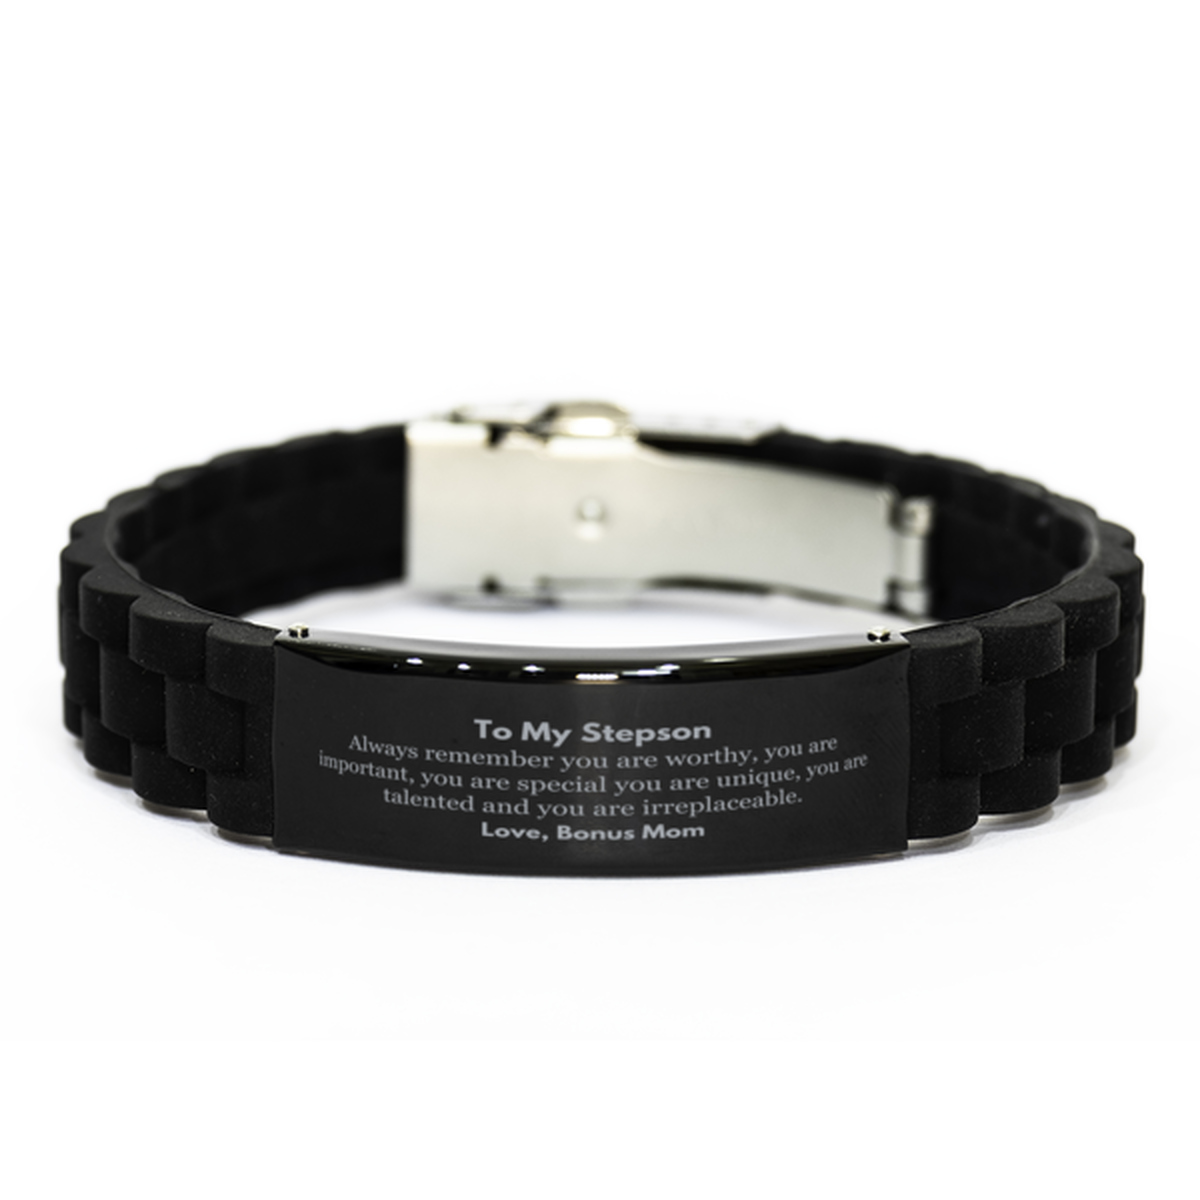 Stepson Birthday Gifts from Bonus Mom, Inspirational Black Glidelock Clasp Bracelet for Stepson Christmas Graduation Gifts for Stepson Always remember you are worthy, you are important. Love, Bonus Mom